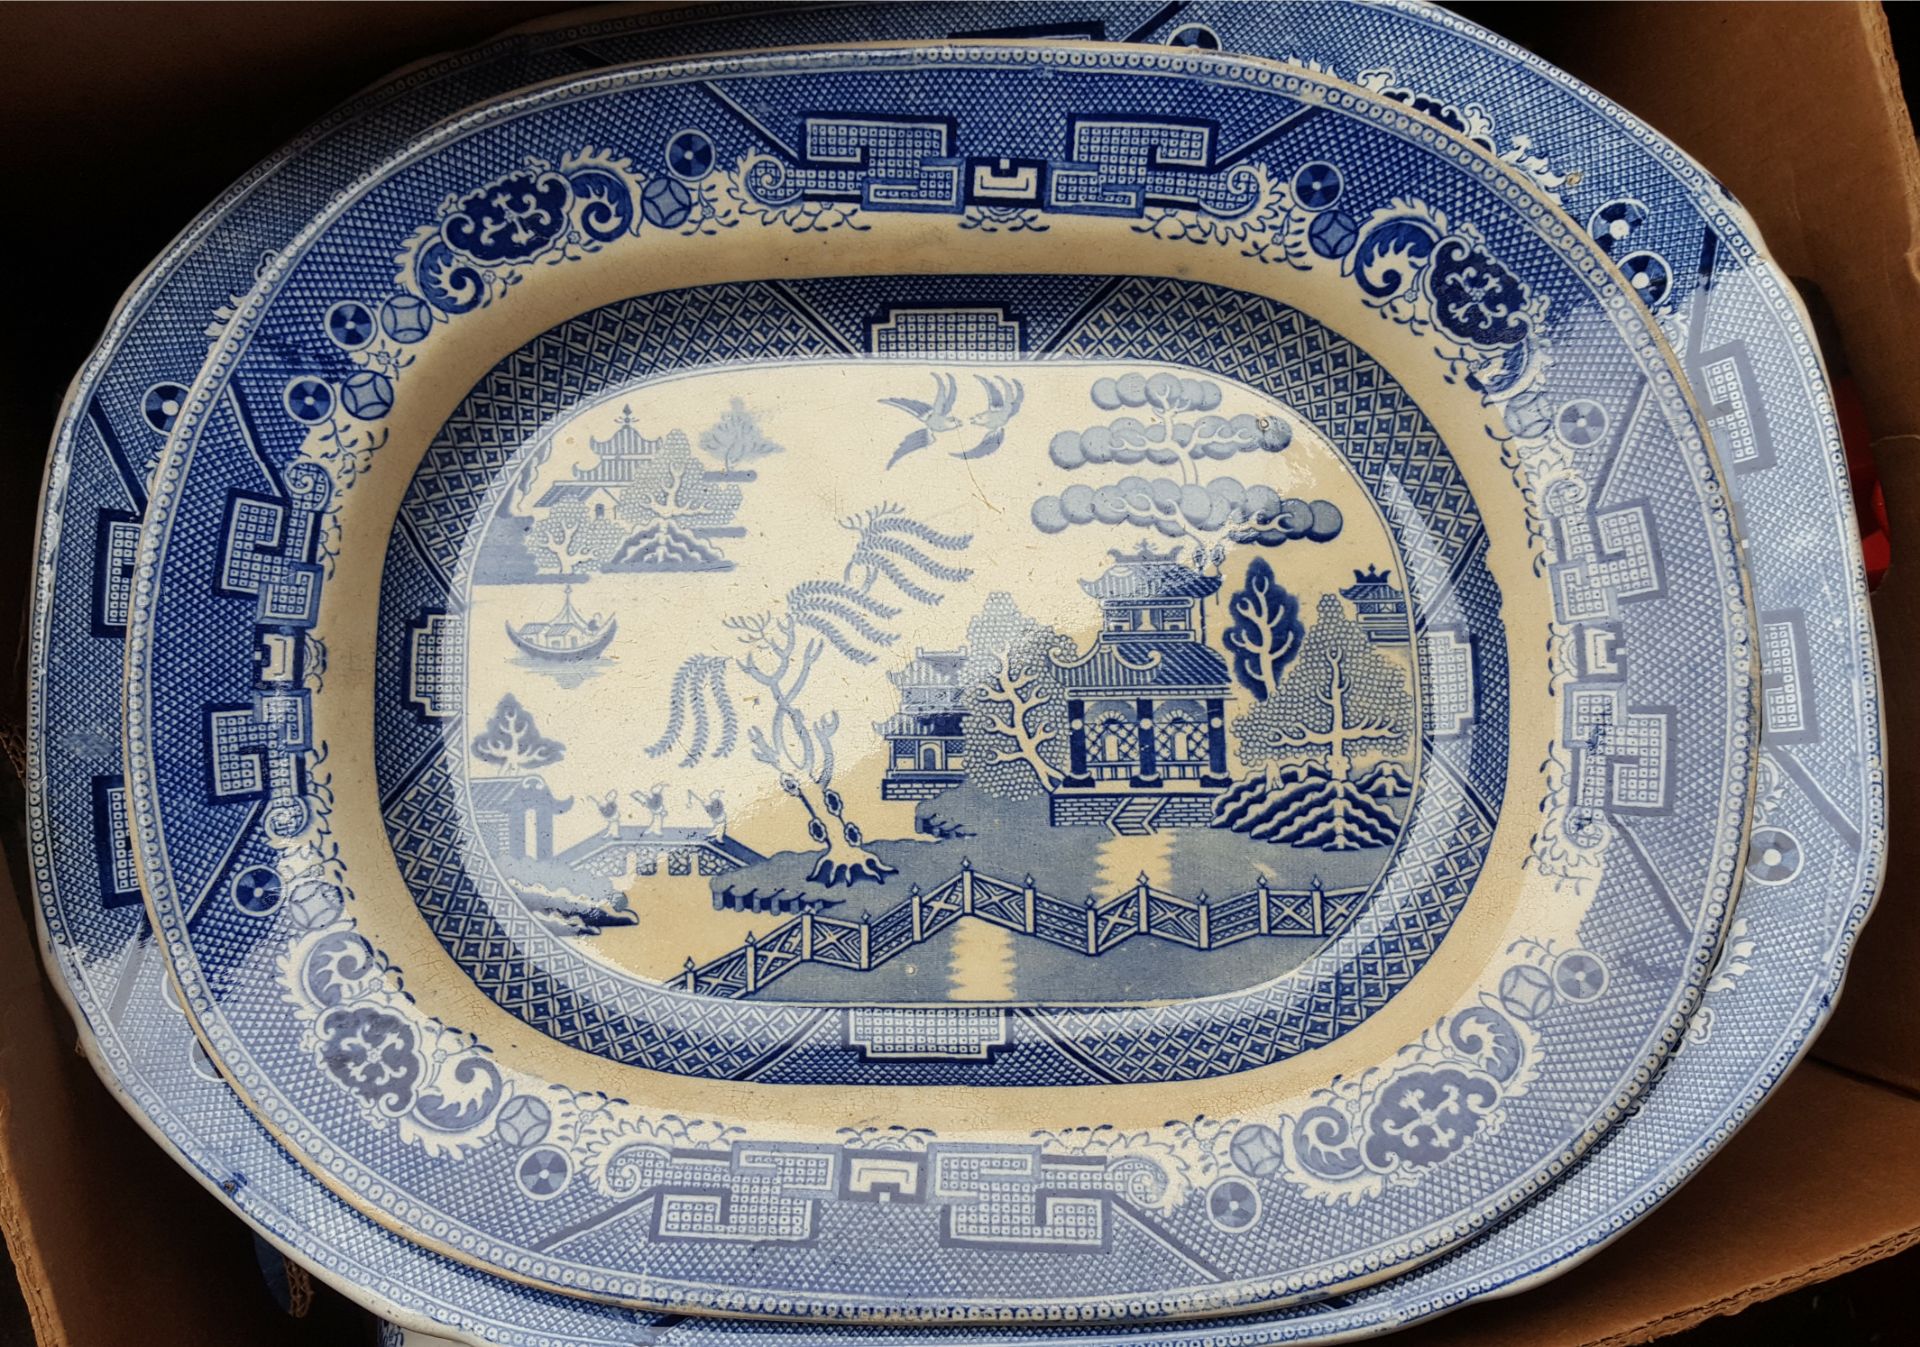 Antique Vintage Box of Blue & White Willow Pattern China Includes Tureen Cruet Jug & Meat Plates - Image 3 of 5